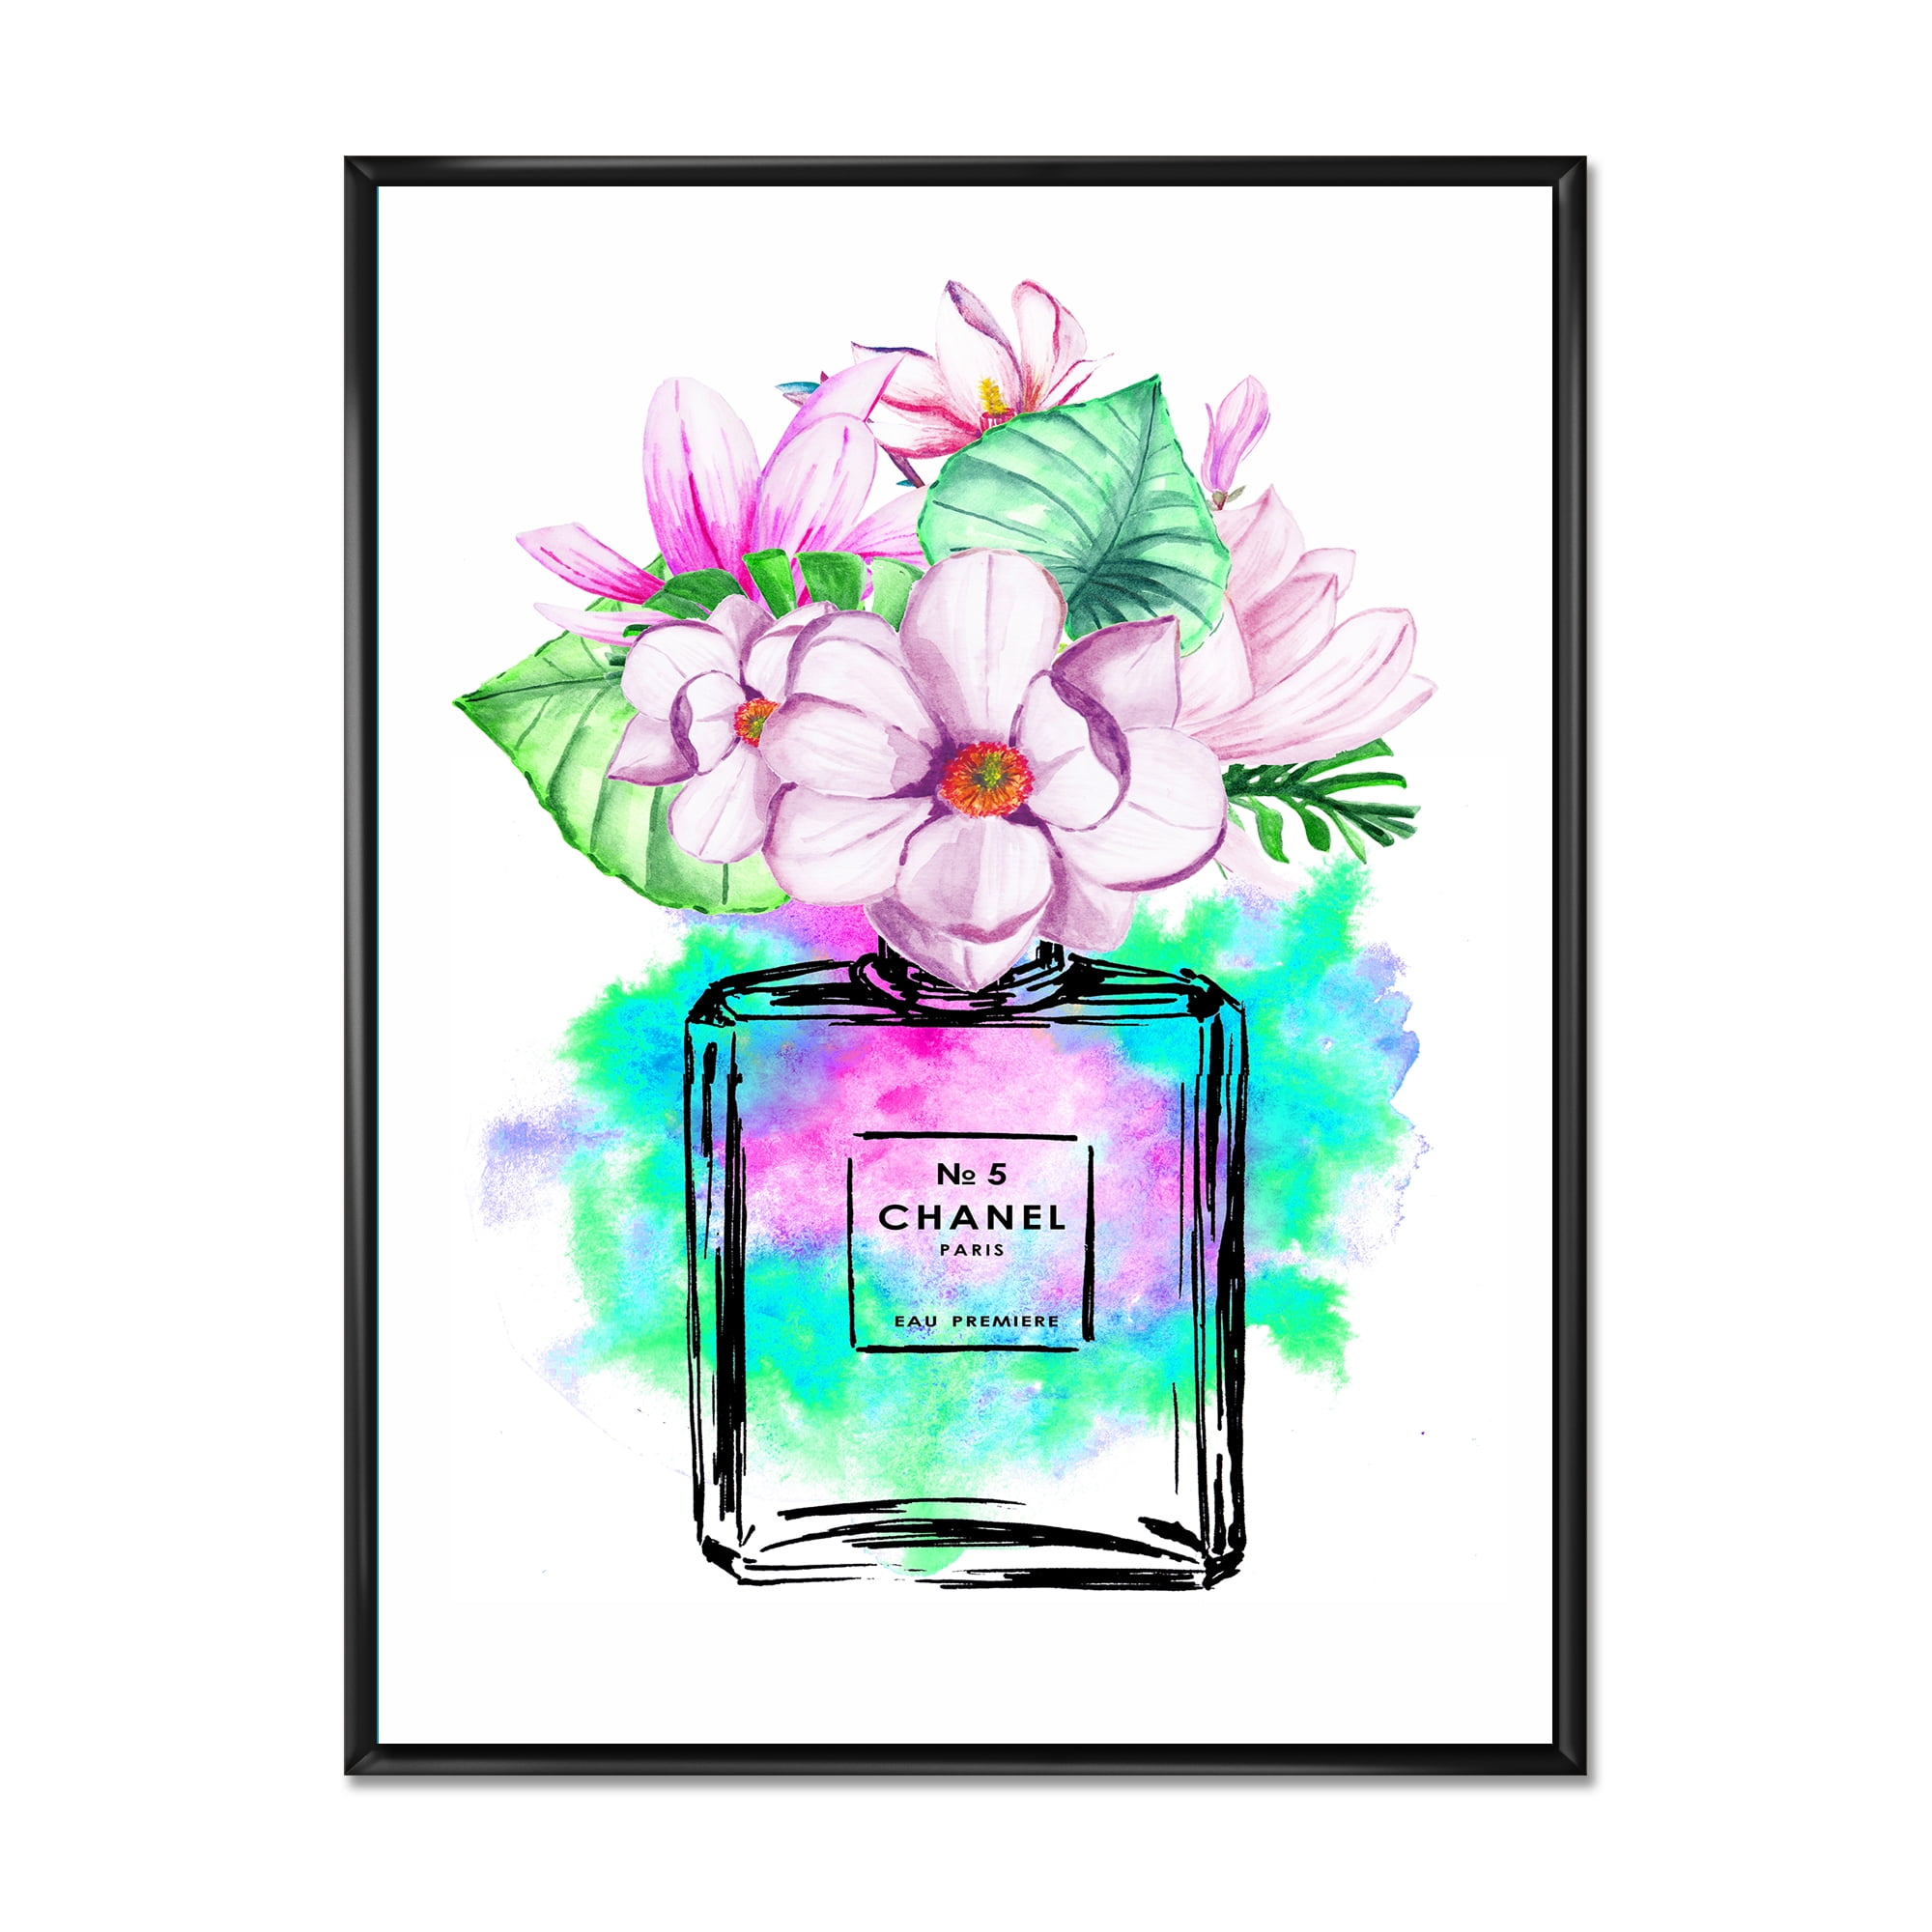 Perfume No. Five Chanel I 16 in x 32 in Framed Painting Canvas Art Print, by Designart